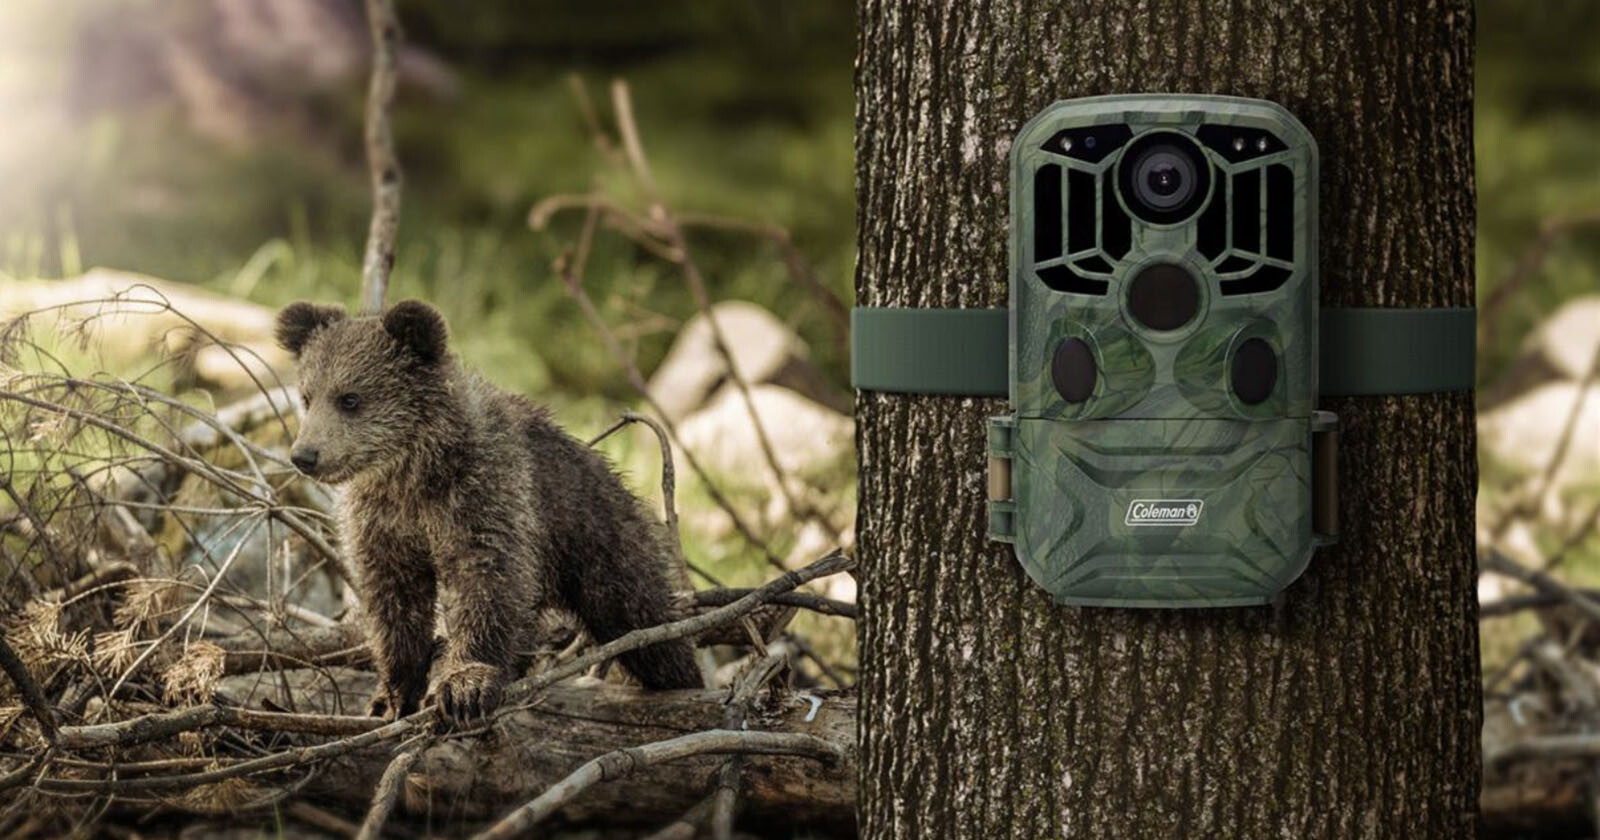 NH Lets Anyone Mount Game Cameras on Private Land Without Permission